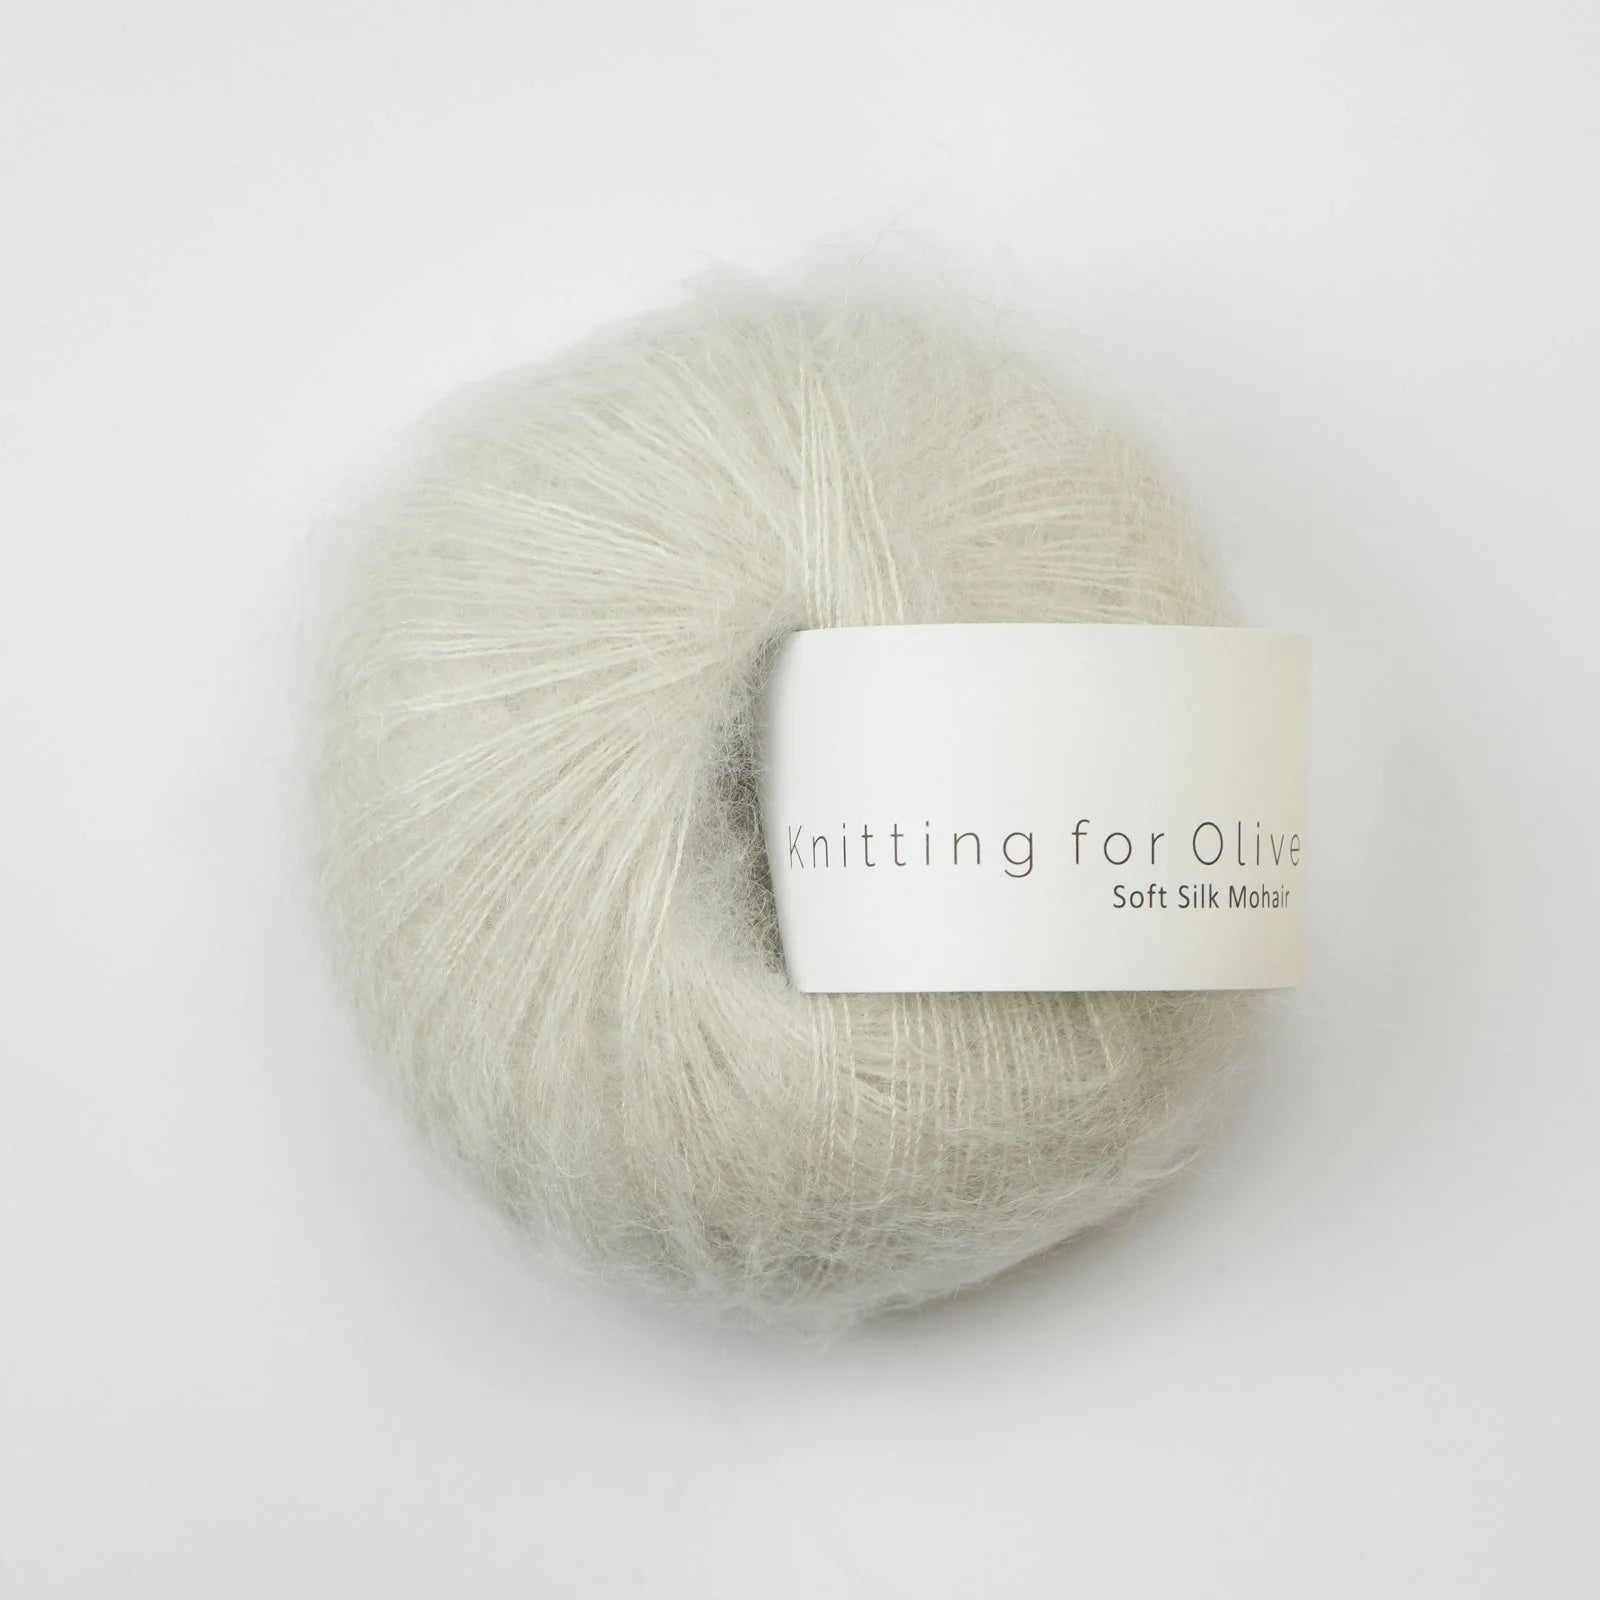 Knitting for Olive Soft Silk Mohair - Knitting for Olive - Cream - The Little Yarn Store